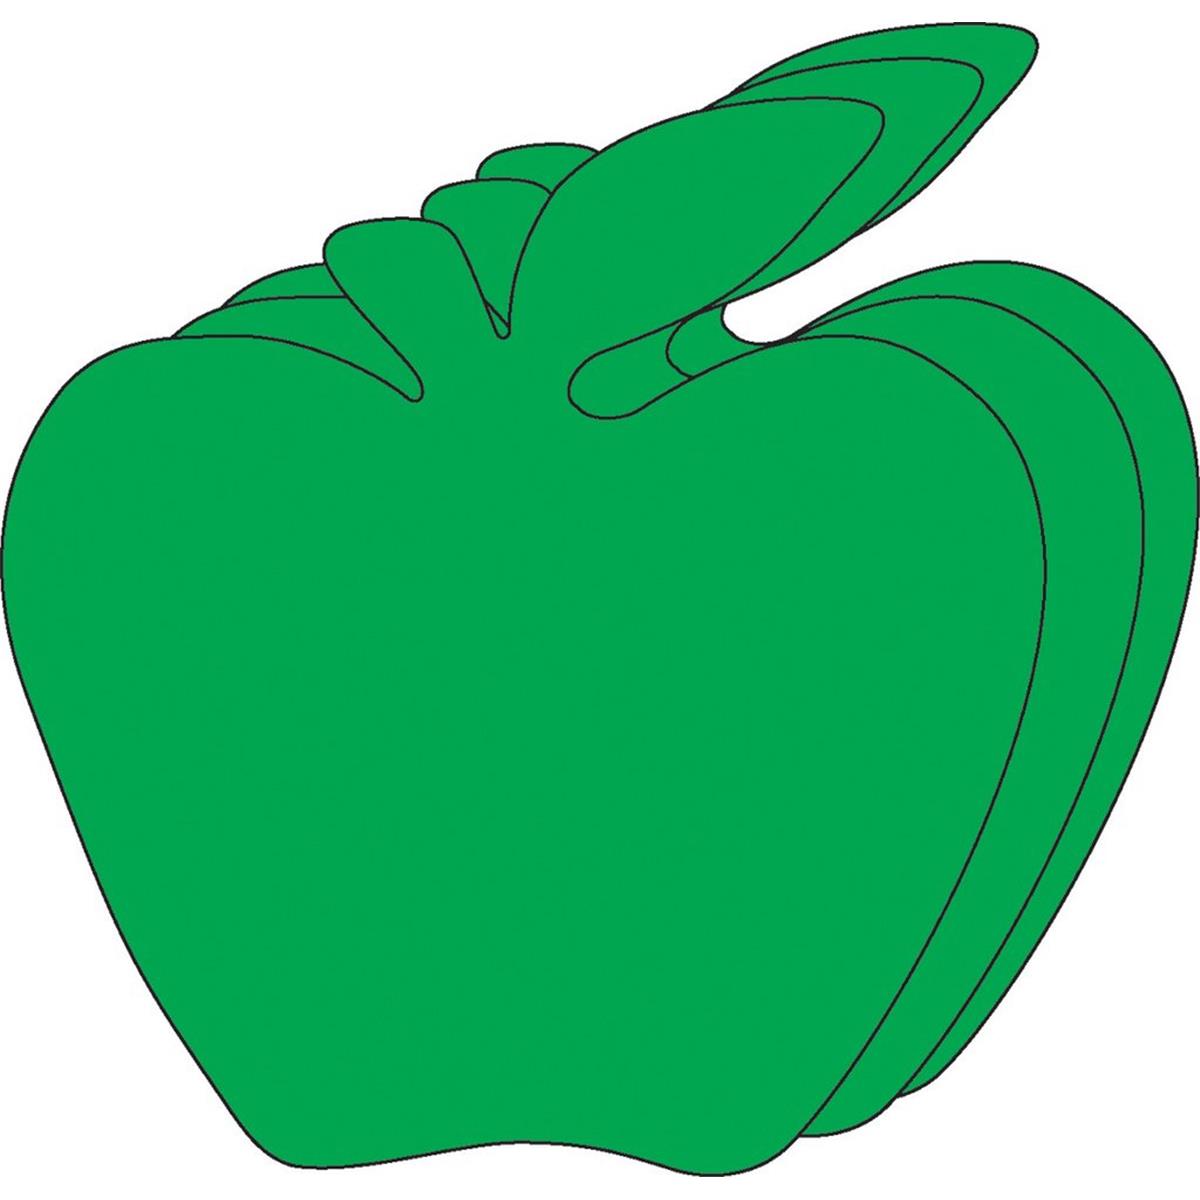 Picture of Creative Shapes Etc SE-7337 5.43 x 7.25 in. Small Single Color Foam Cut-Outs&#44; Green Apple - 15 Sheets per Pack